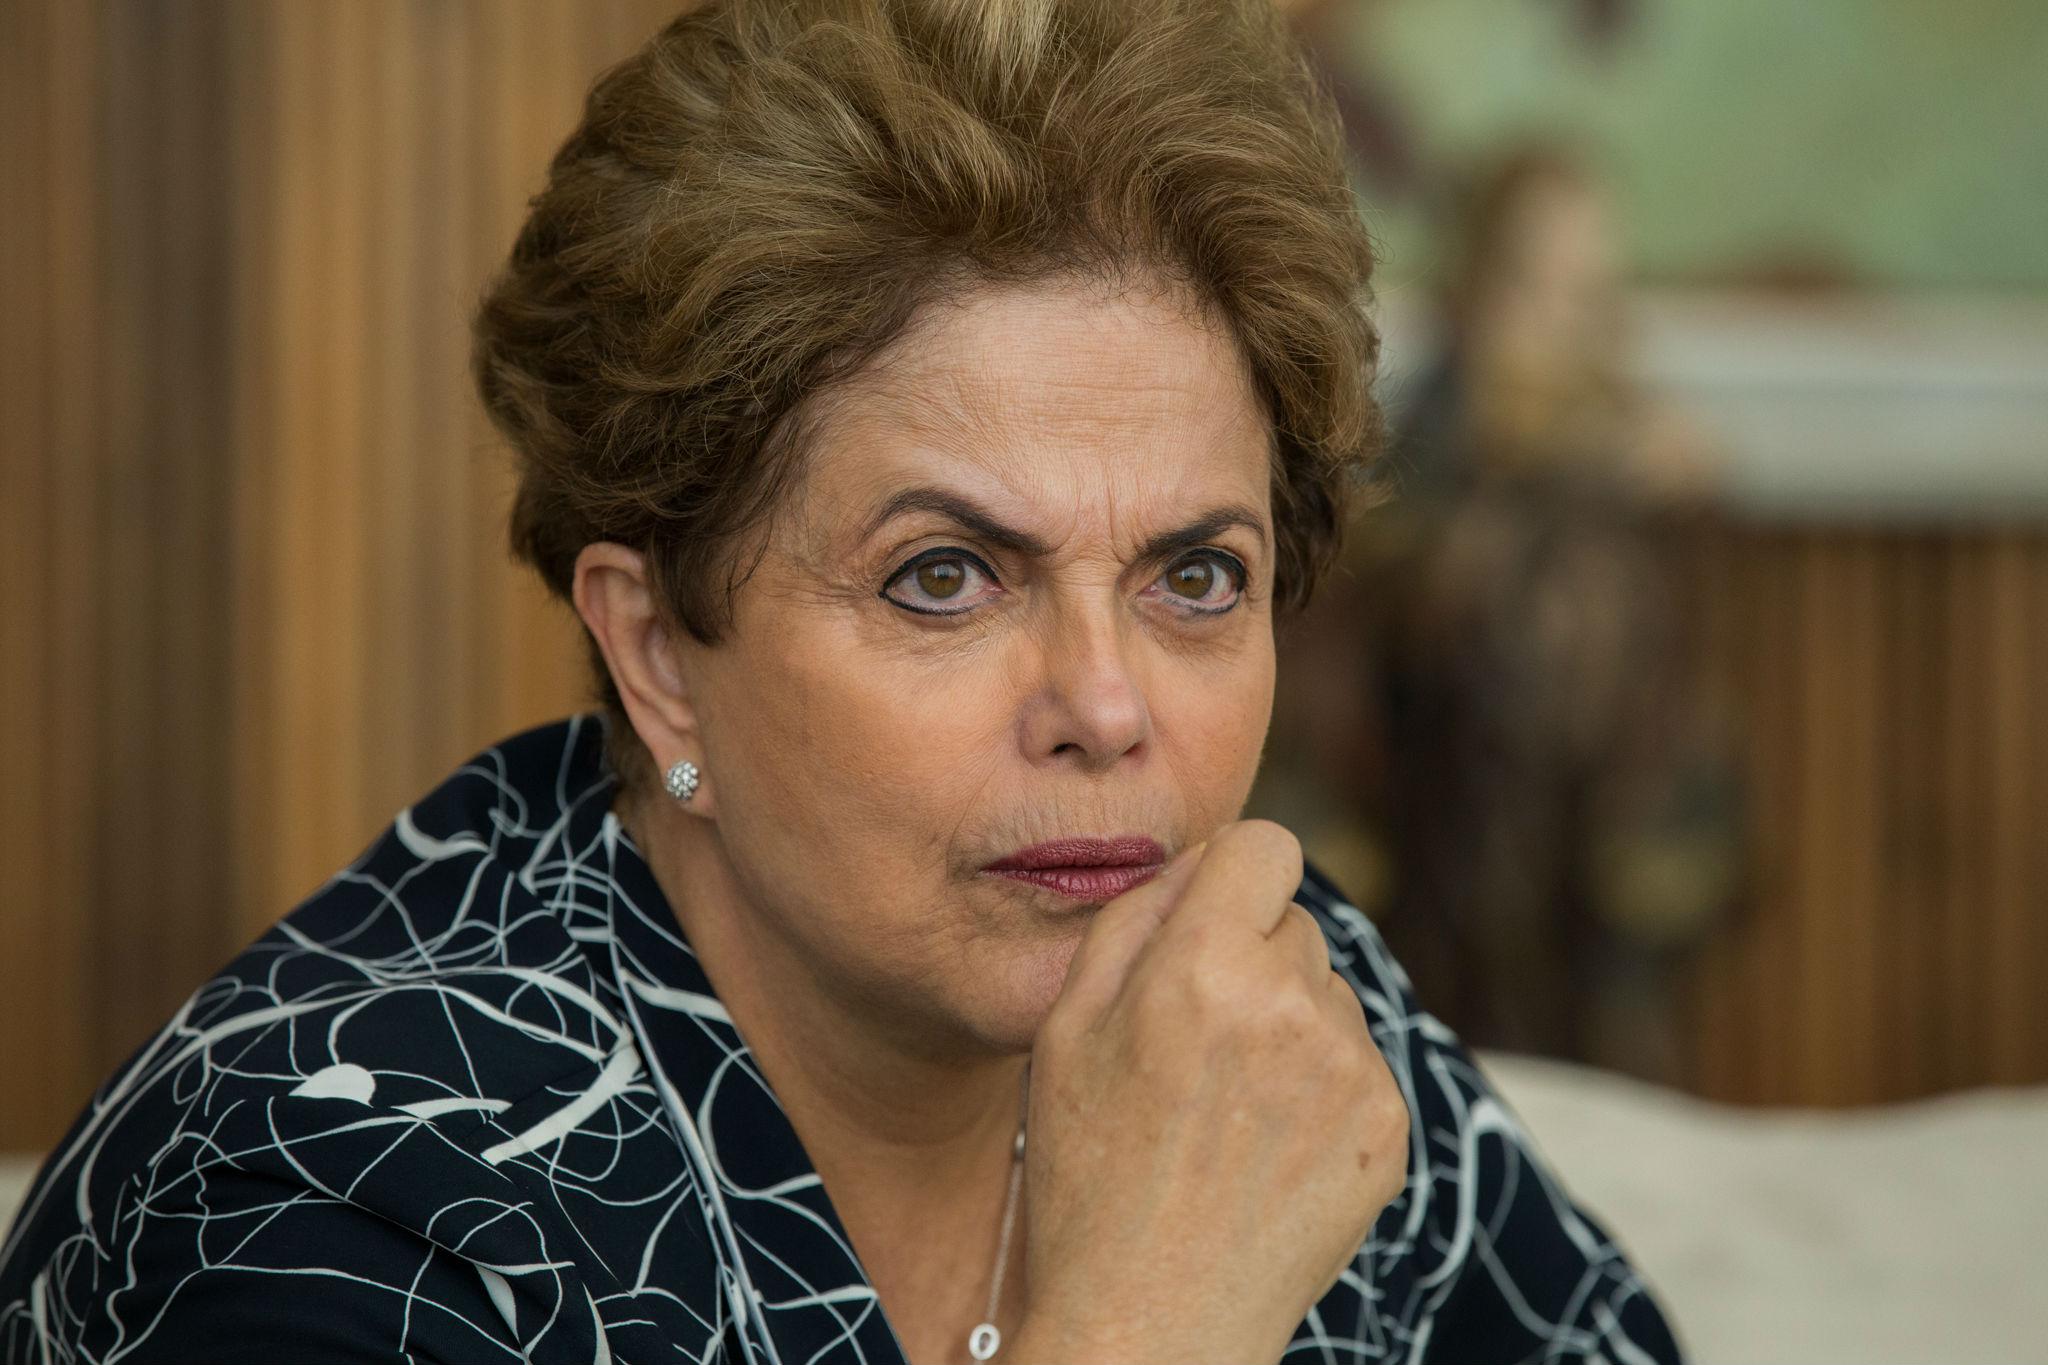 Dilma Rousseff said she was the victim of a parliamentary coup